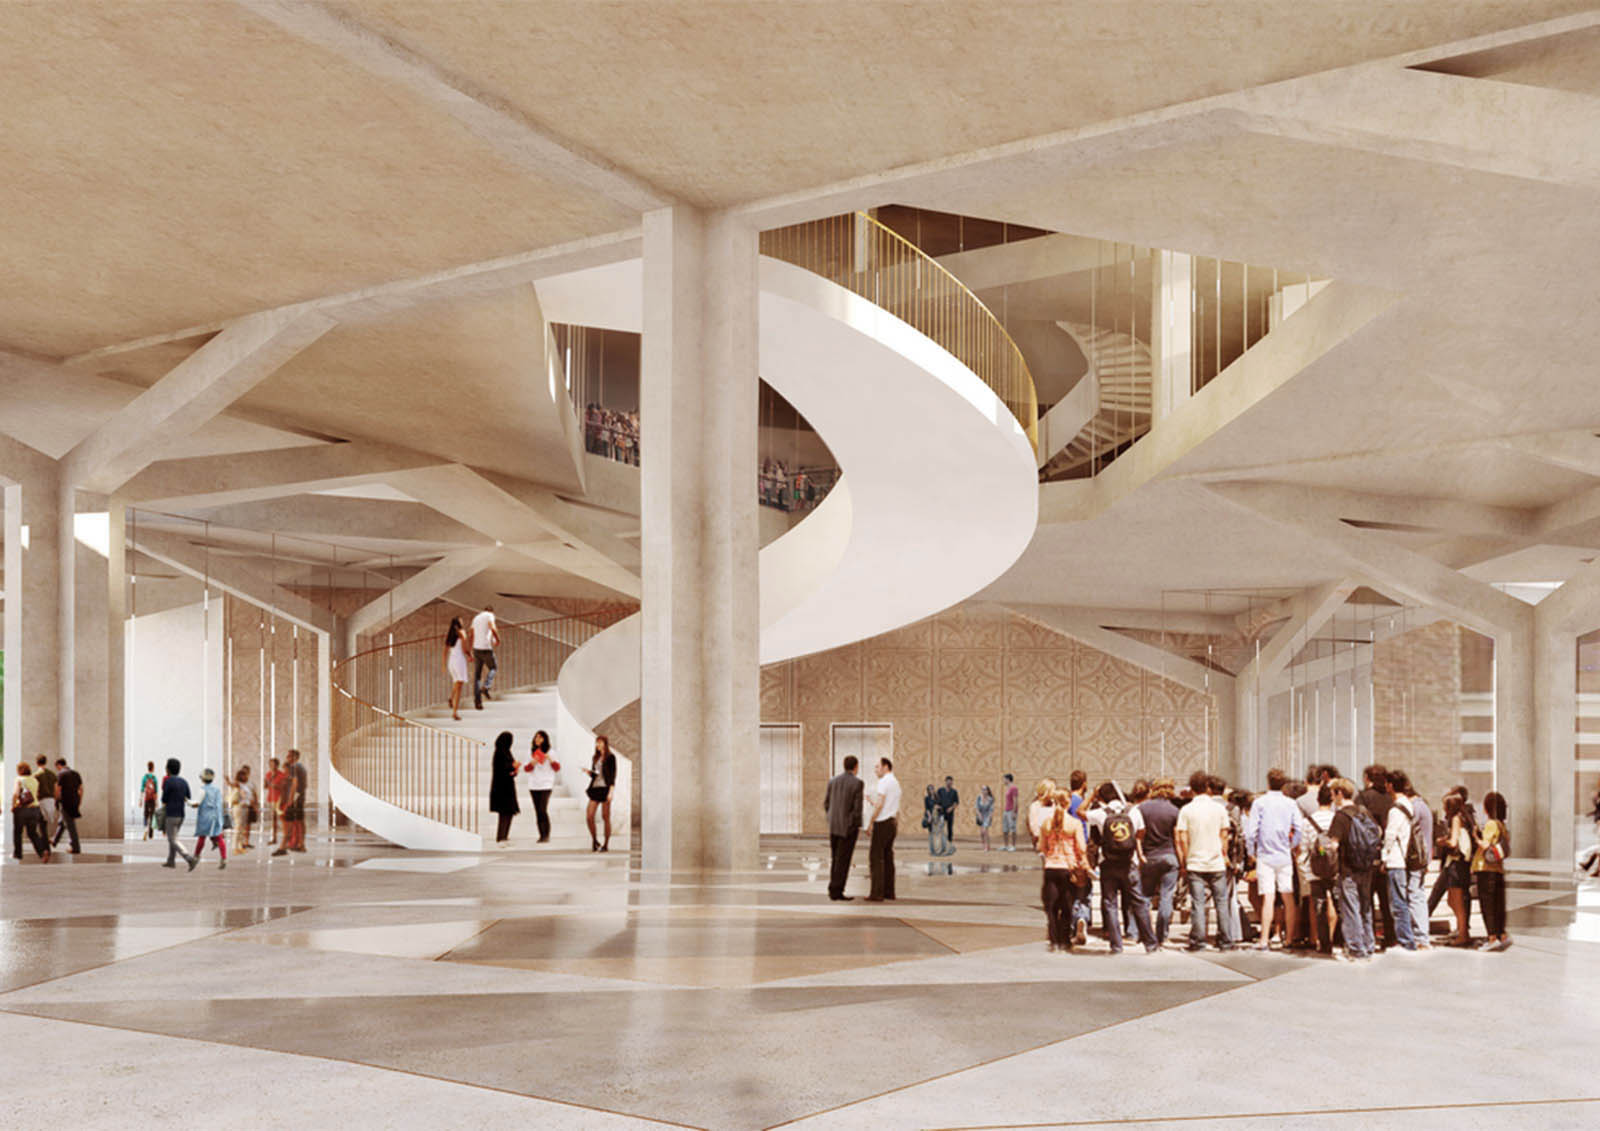 Proposed atrium space at the London of School of Economics, by Grafton Architects